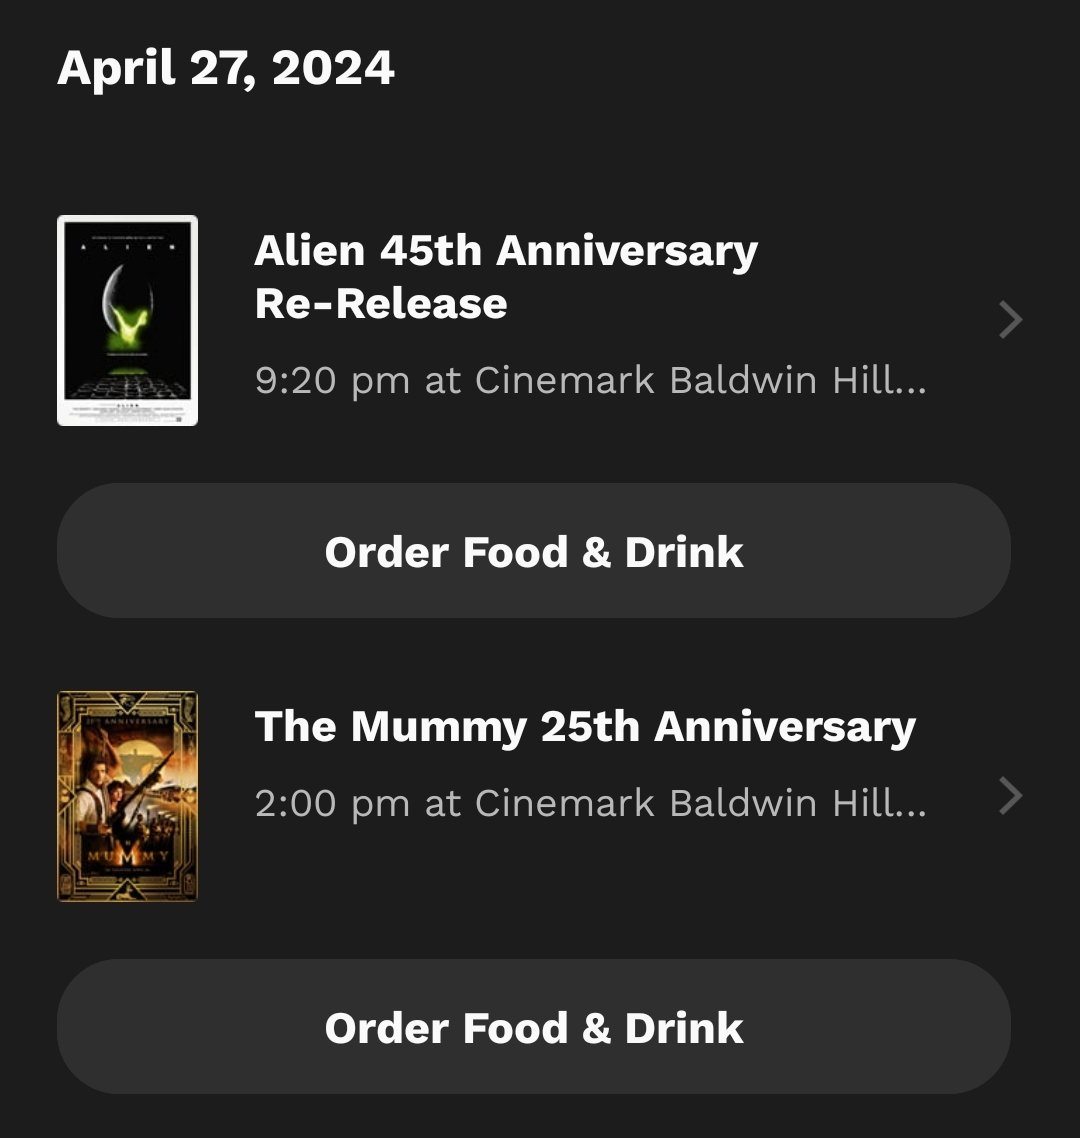 This is what happens when @Cinemark is less than 1 mile from where you live.